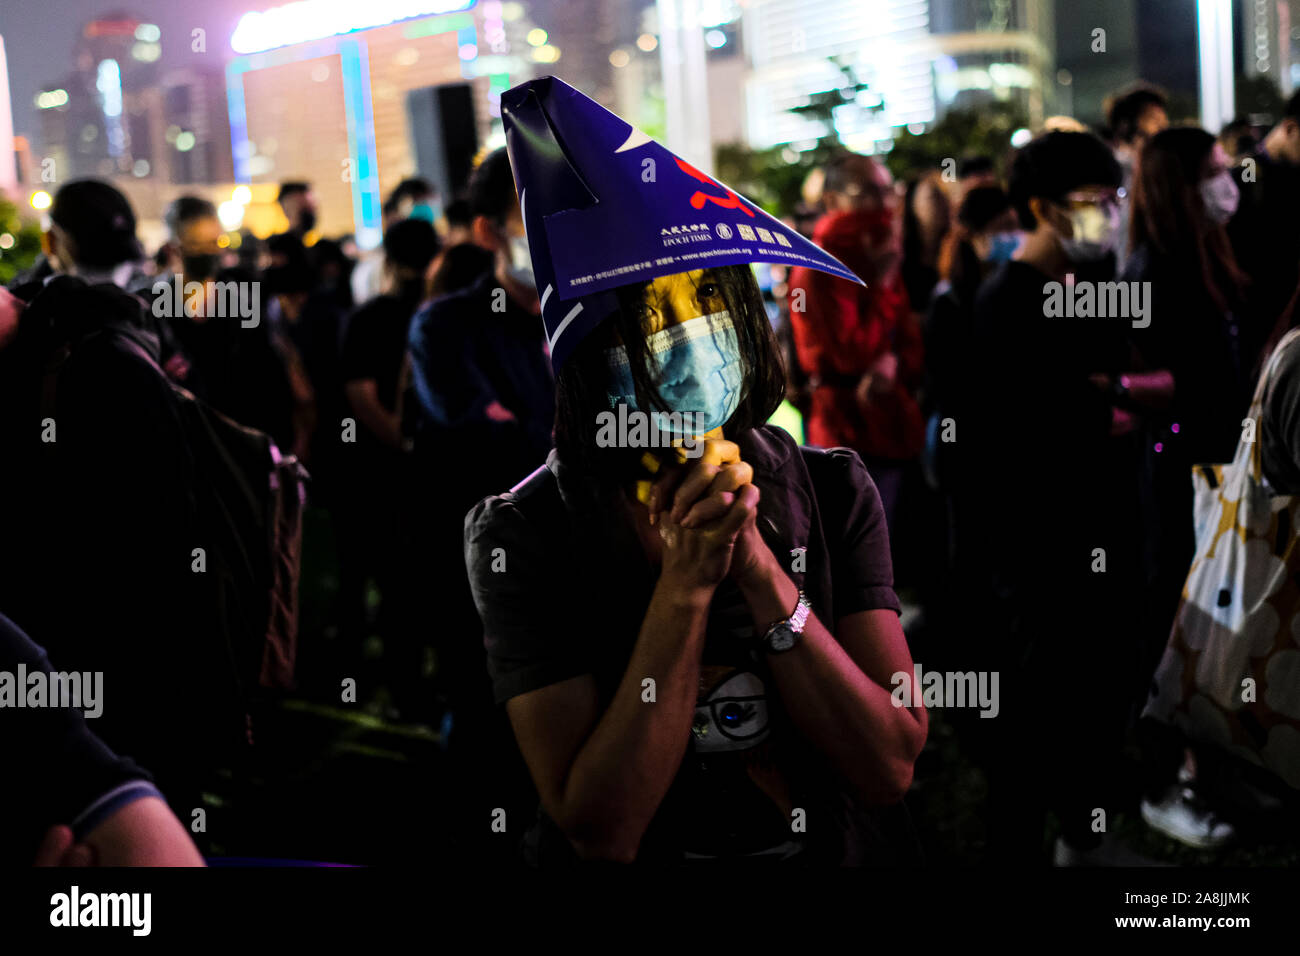 A man with a mask prays during the rally.Memorial rally at Tamar Park in Hong Kong to mourn the death of a 22 years old university student, Alex Chow Tsz Lok who died from a serious brain injury during a fall on November 4th as police skirmished with demonstrators last weekend. He was left in critical condition and died after suffering a cardiac arrest. Stock Photo